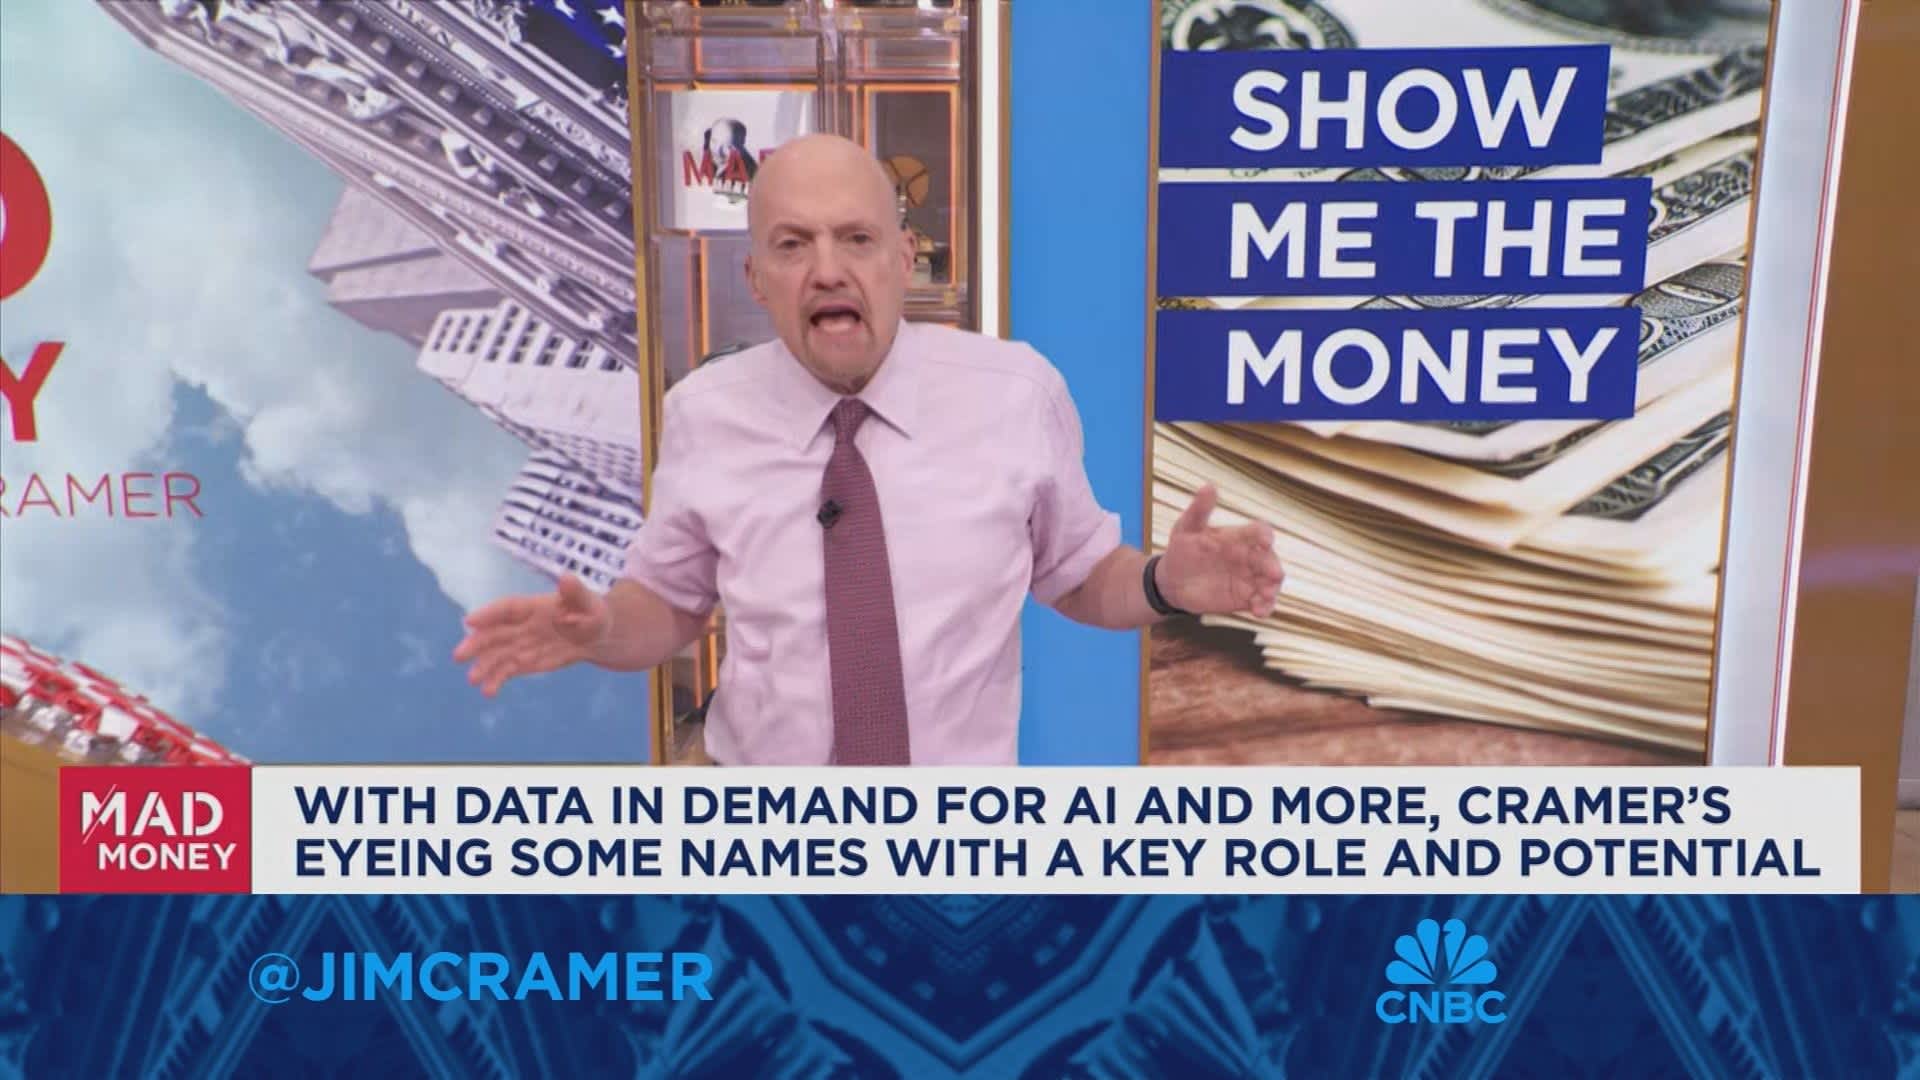 Right now you want to be invested in companies that don't cater to the consumer, says Jim Cramer